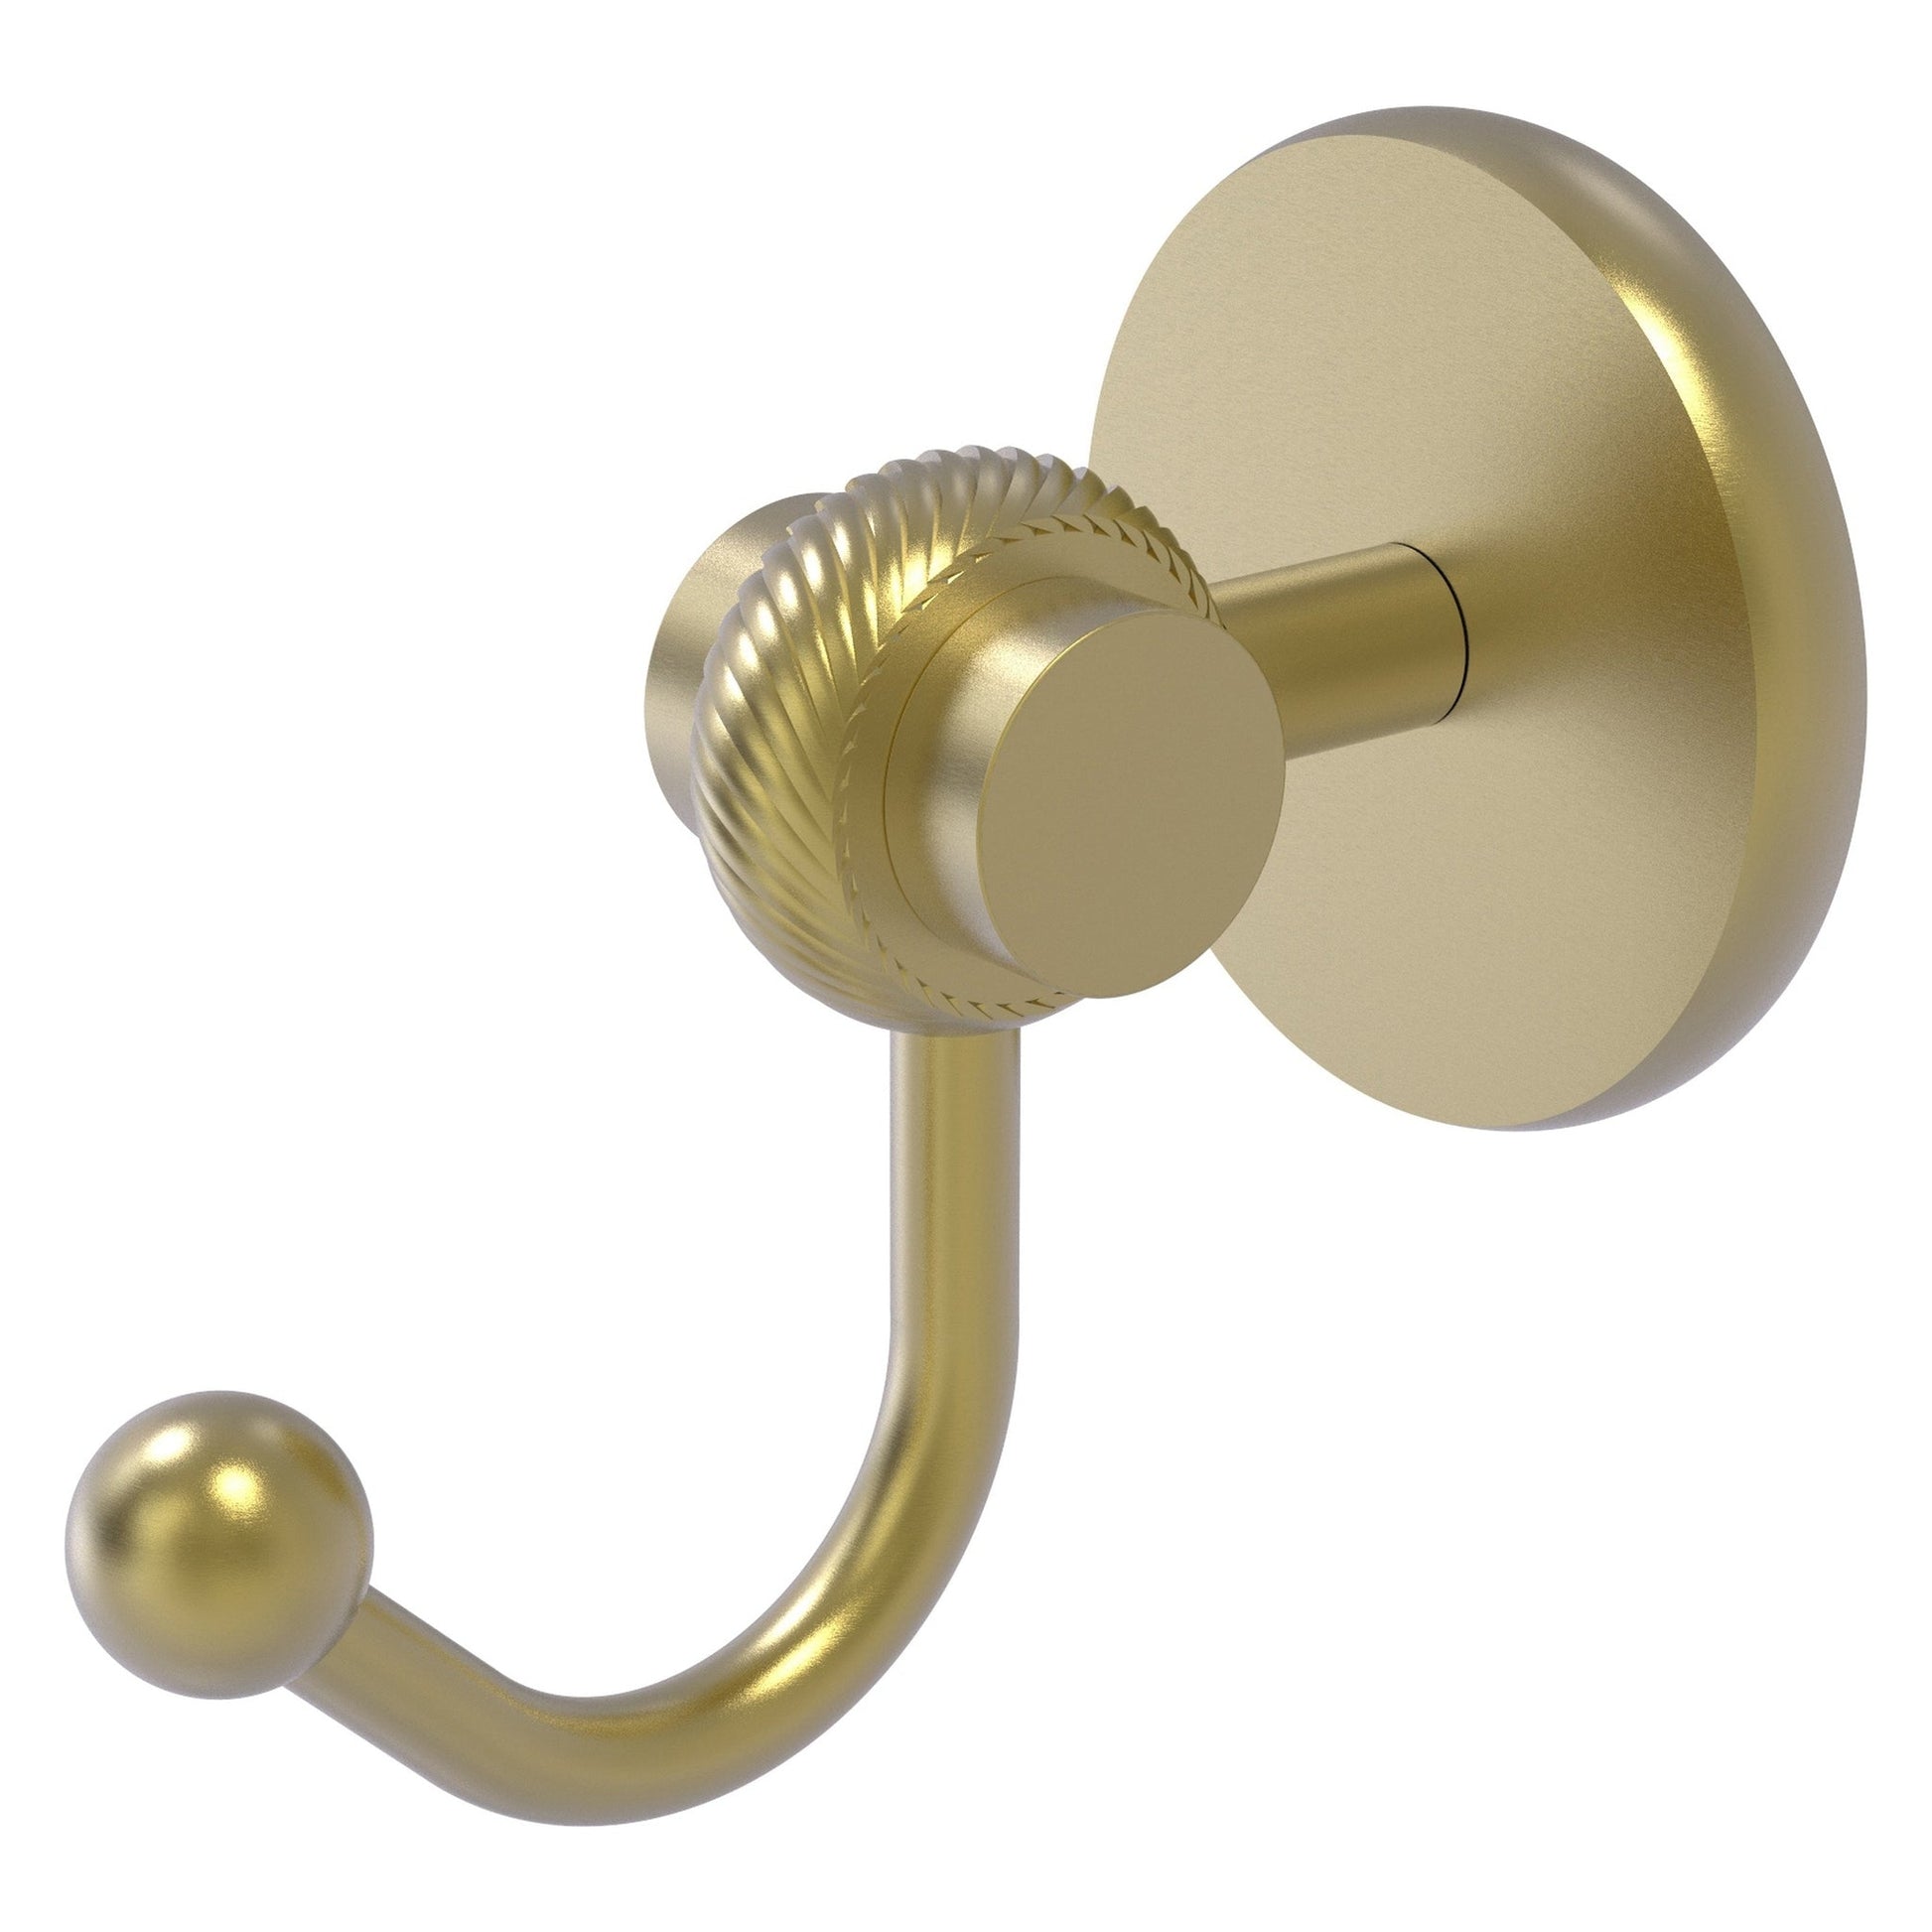 Allied Brass Satellite Orbit Two 2.77" x 4.54" Satin Brass Solid Brass Robe Hook With Twisted Accents